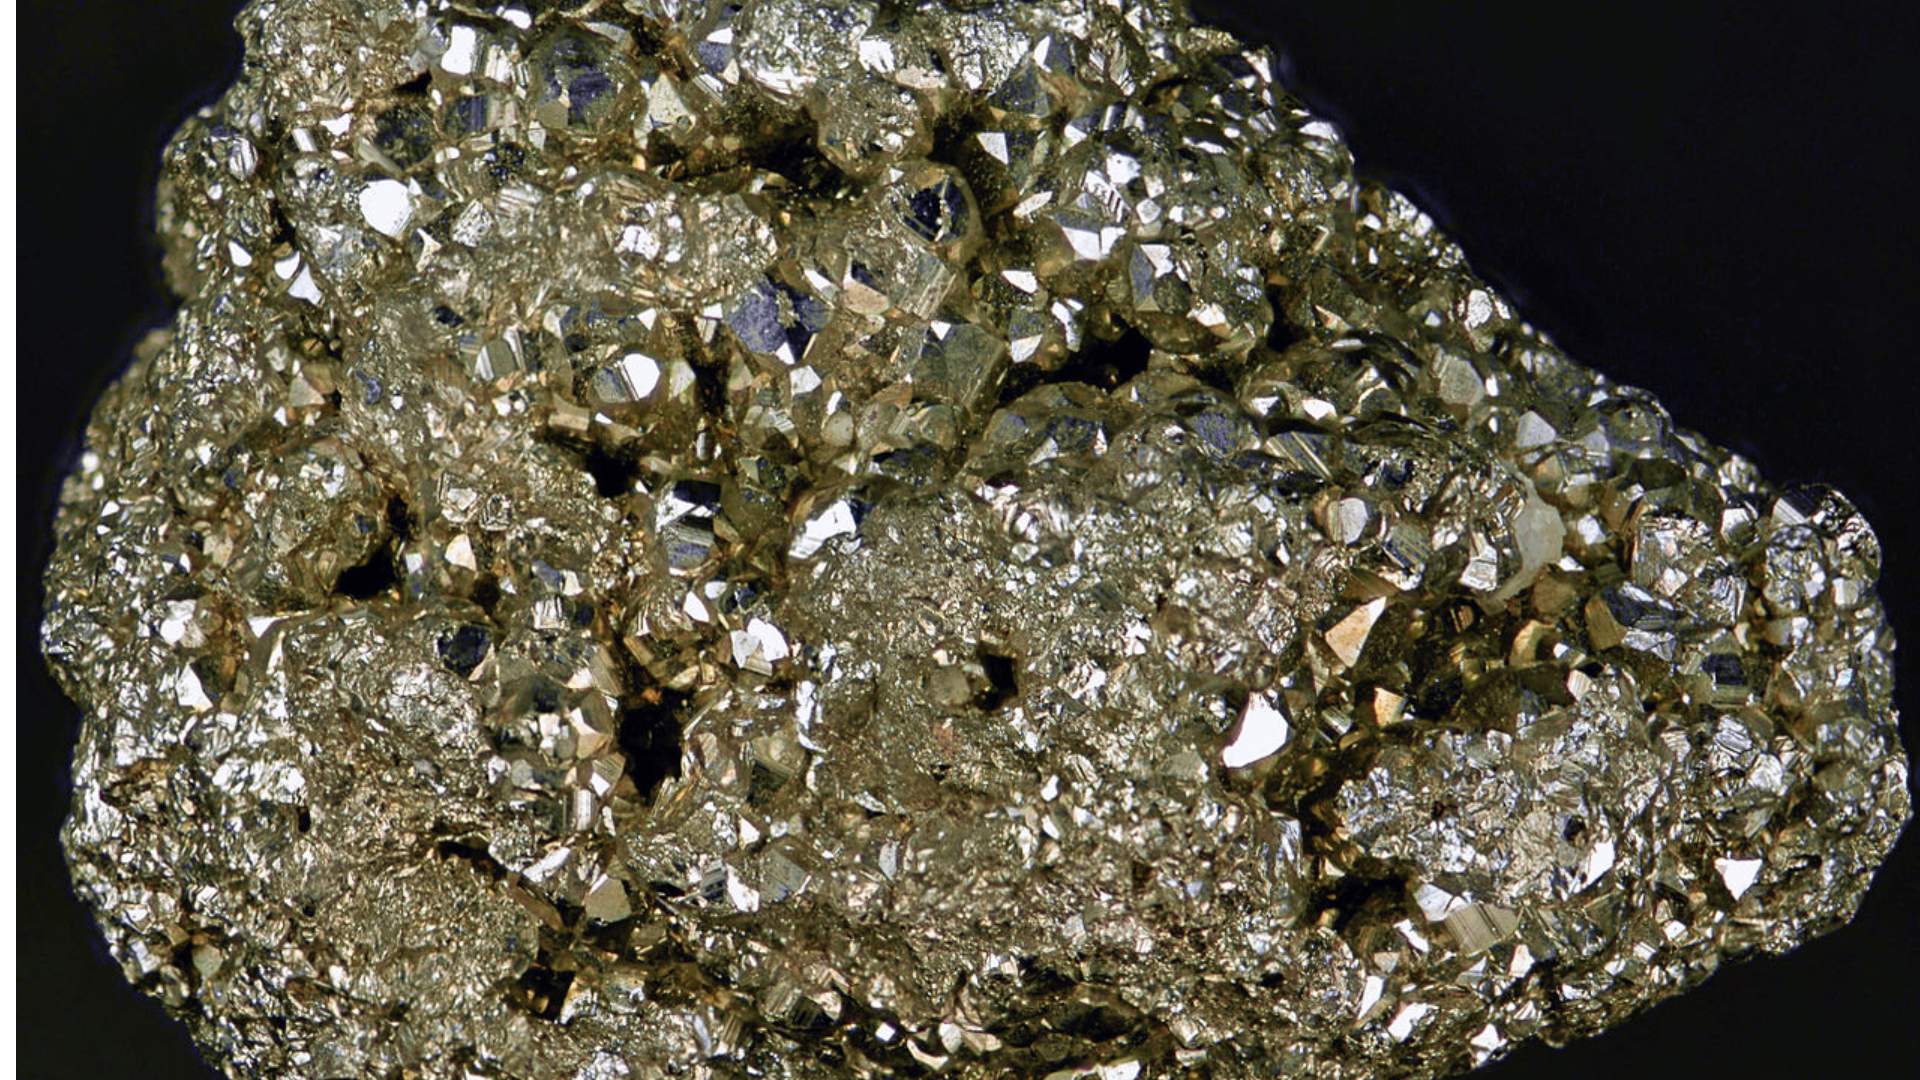 Discovery in fool’s gold: Shale pyrites hold hidden lithium riches [Video]